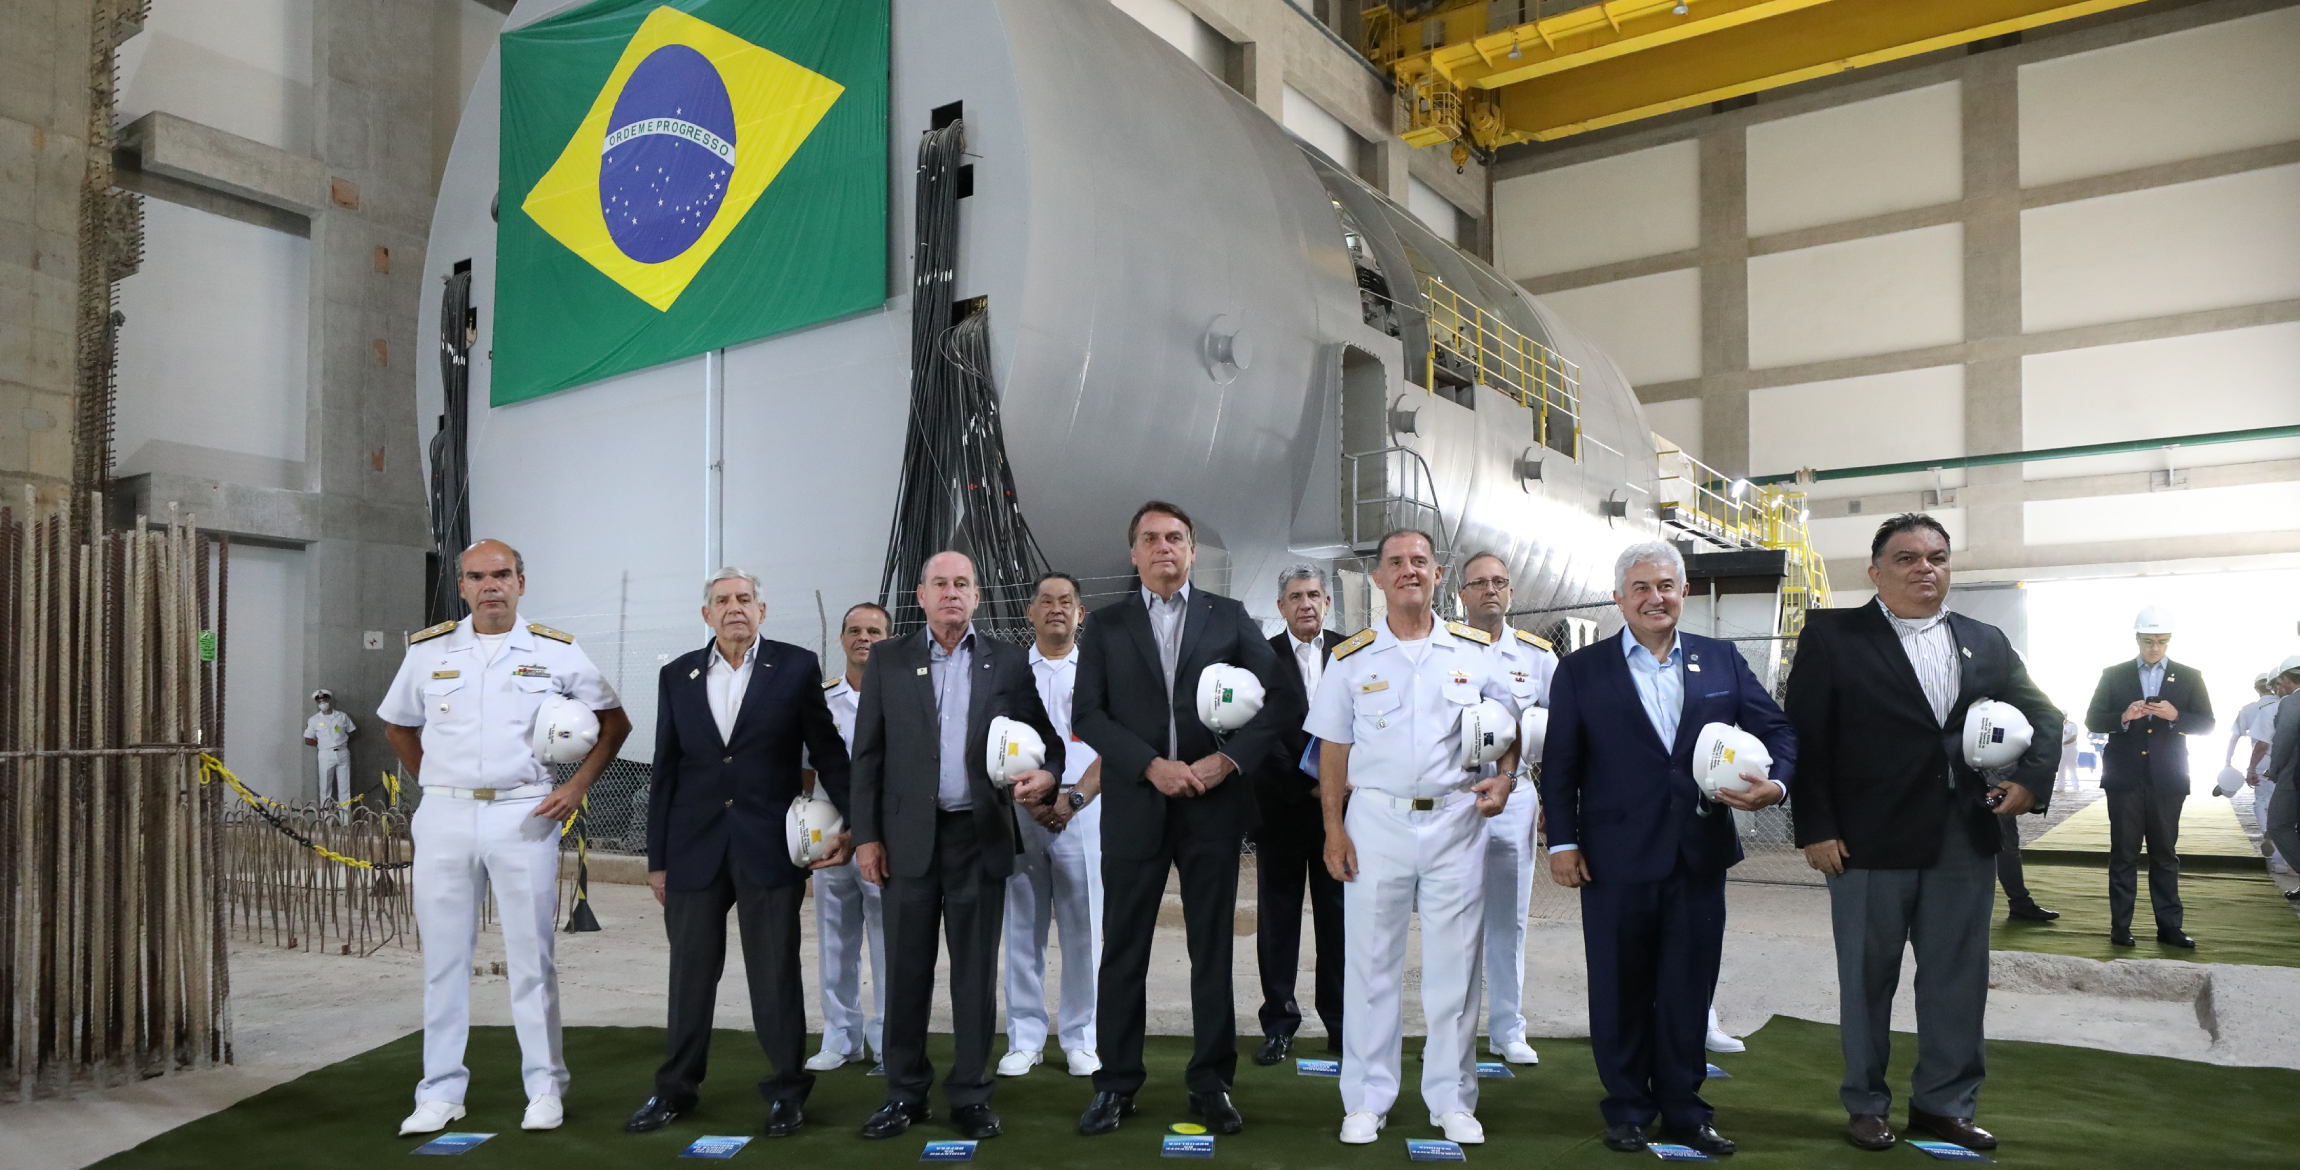 Ex-president Jair Bolsonaro and the prototype of the Brazilian naval nuclear reactor at the Electronuclear Energy Generation Laboratory (LABGENE), October 2020. Photo by Marcos Corrêa, flickr.com.